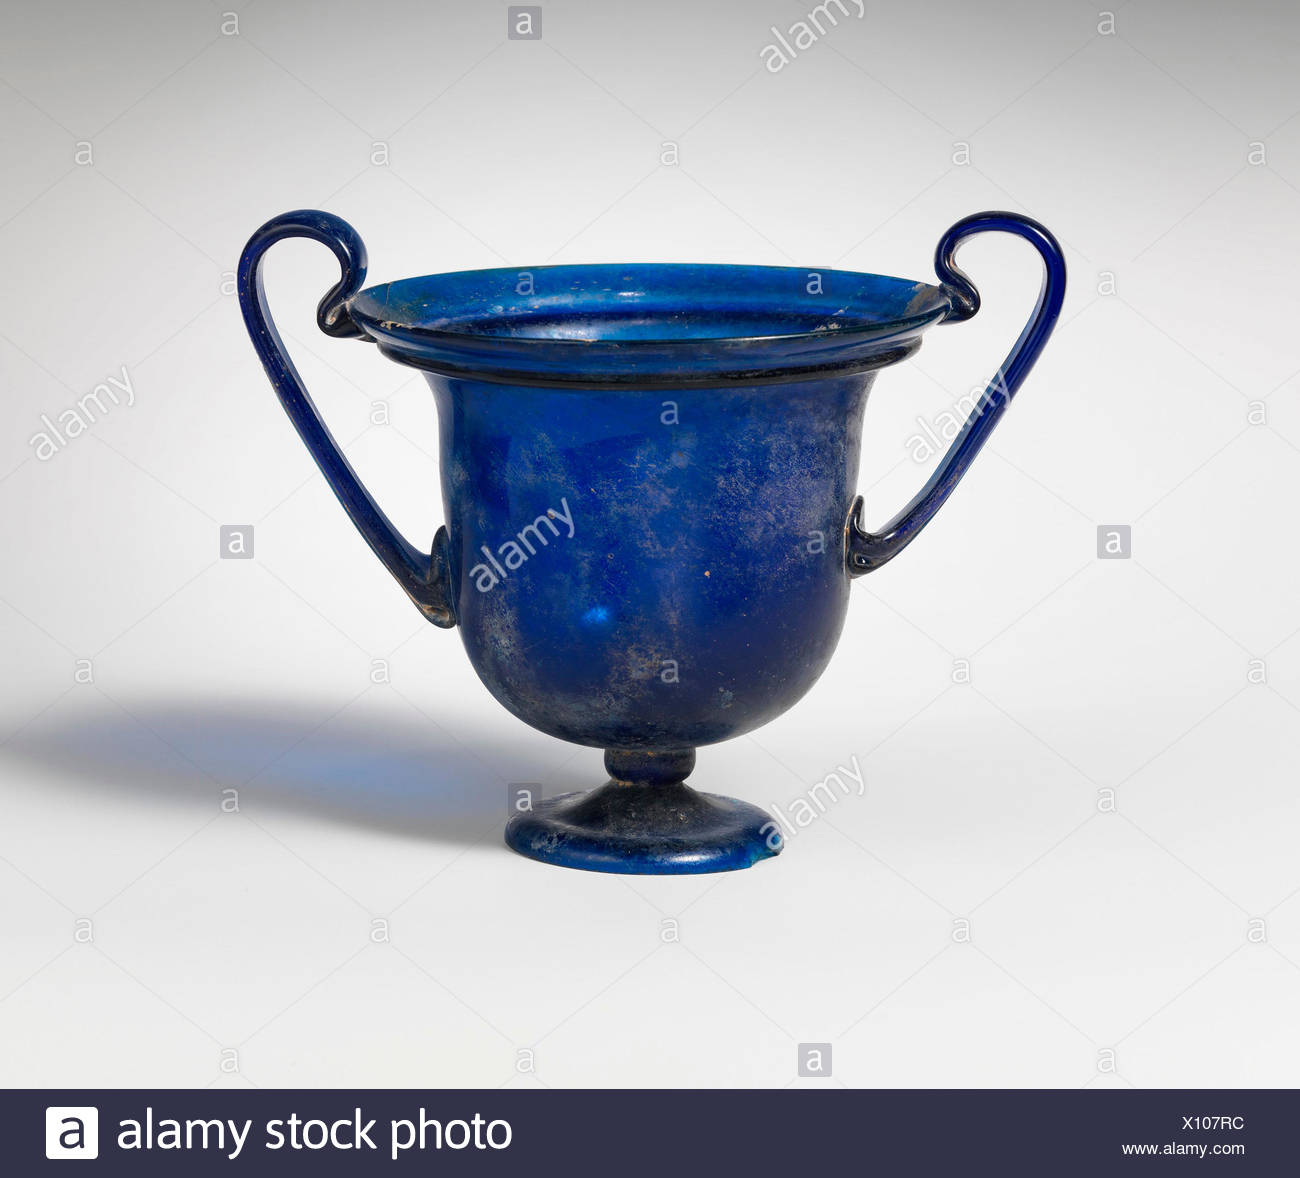 Lower Edge Stem High Resolution Stock Photography and Images - Alamy